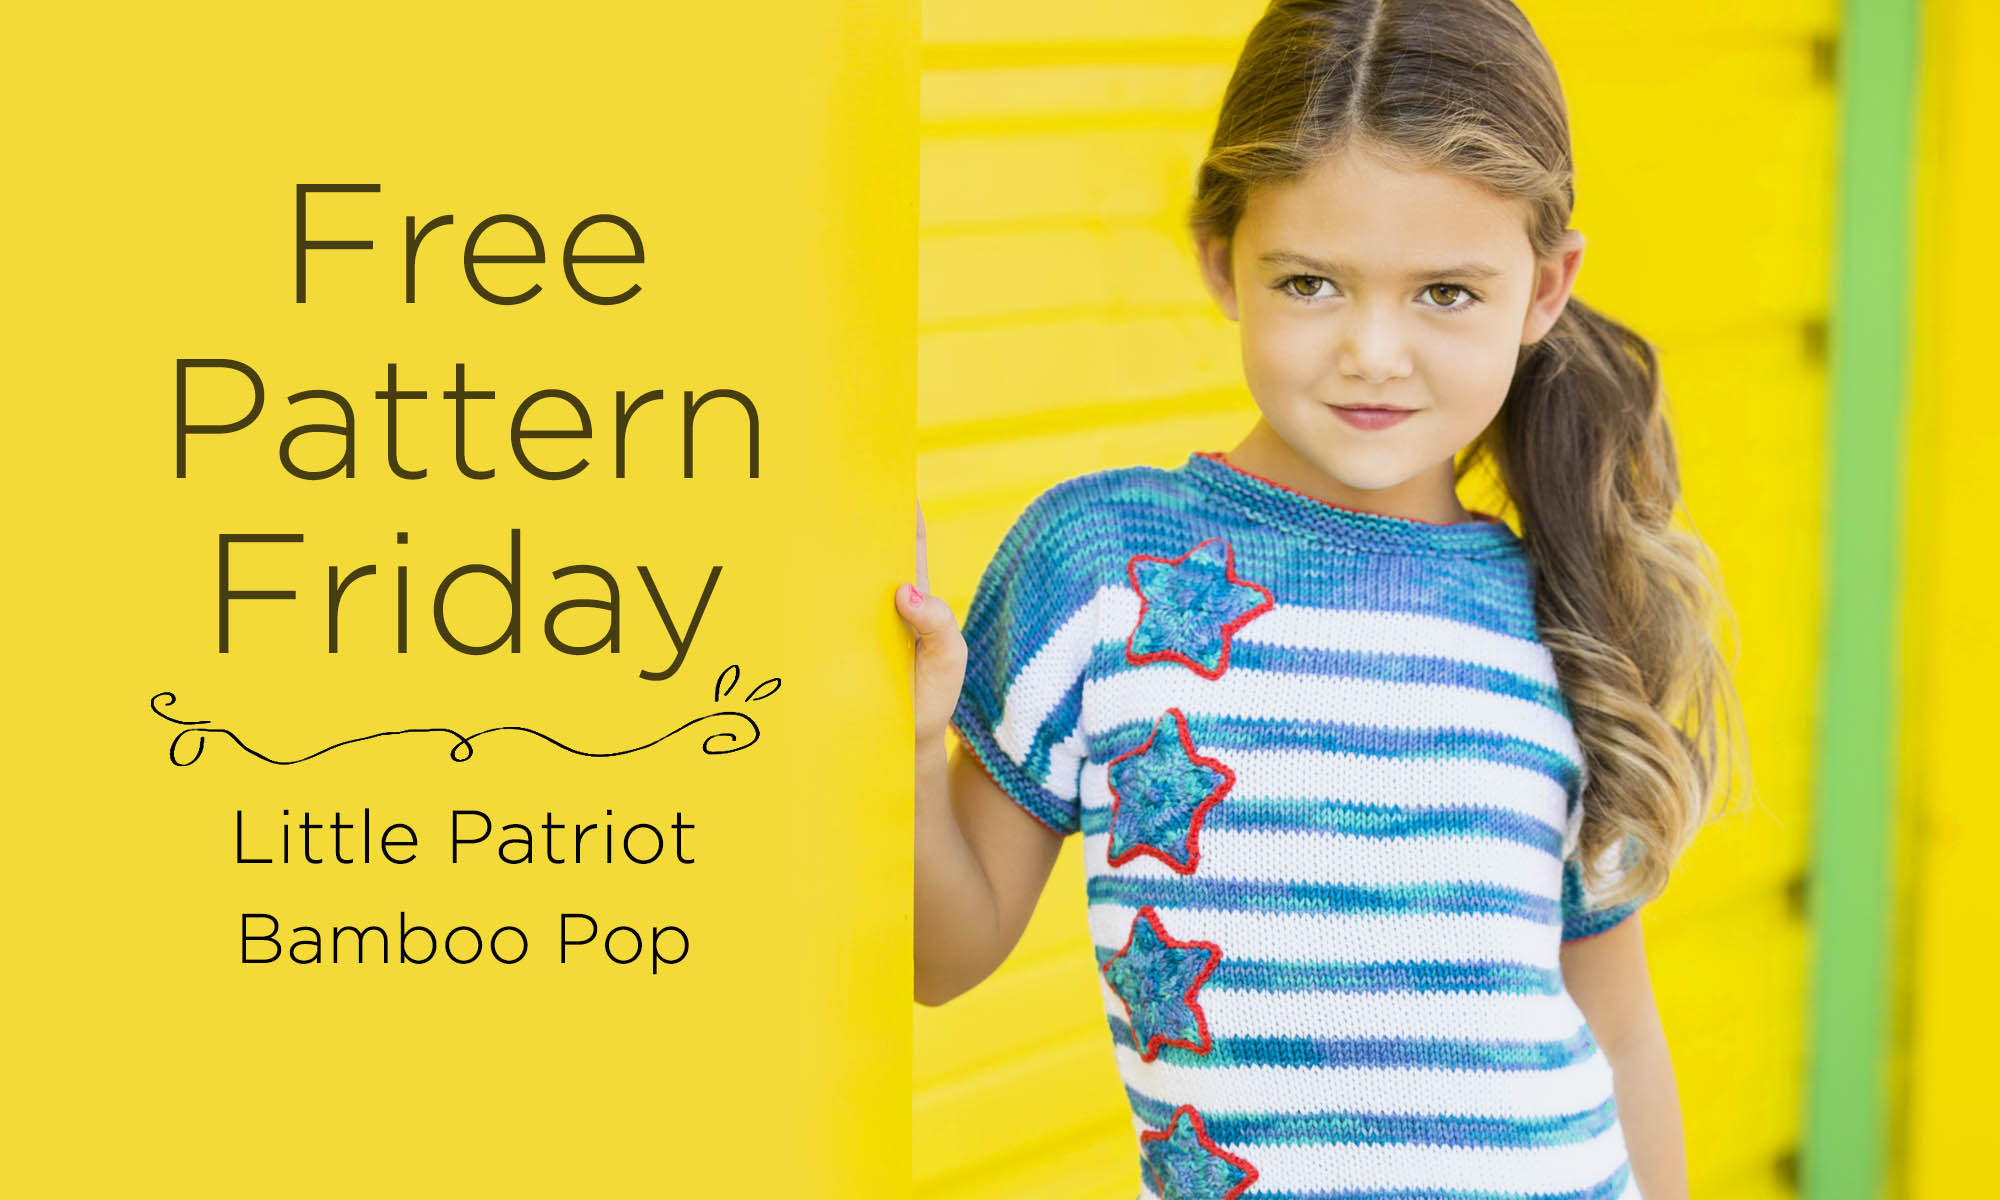 Image of girl in knitted top. Text reads: Free Pattern Friday, Little Patriot, Bamboo Pop